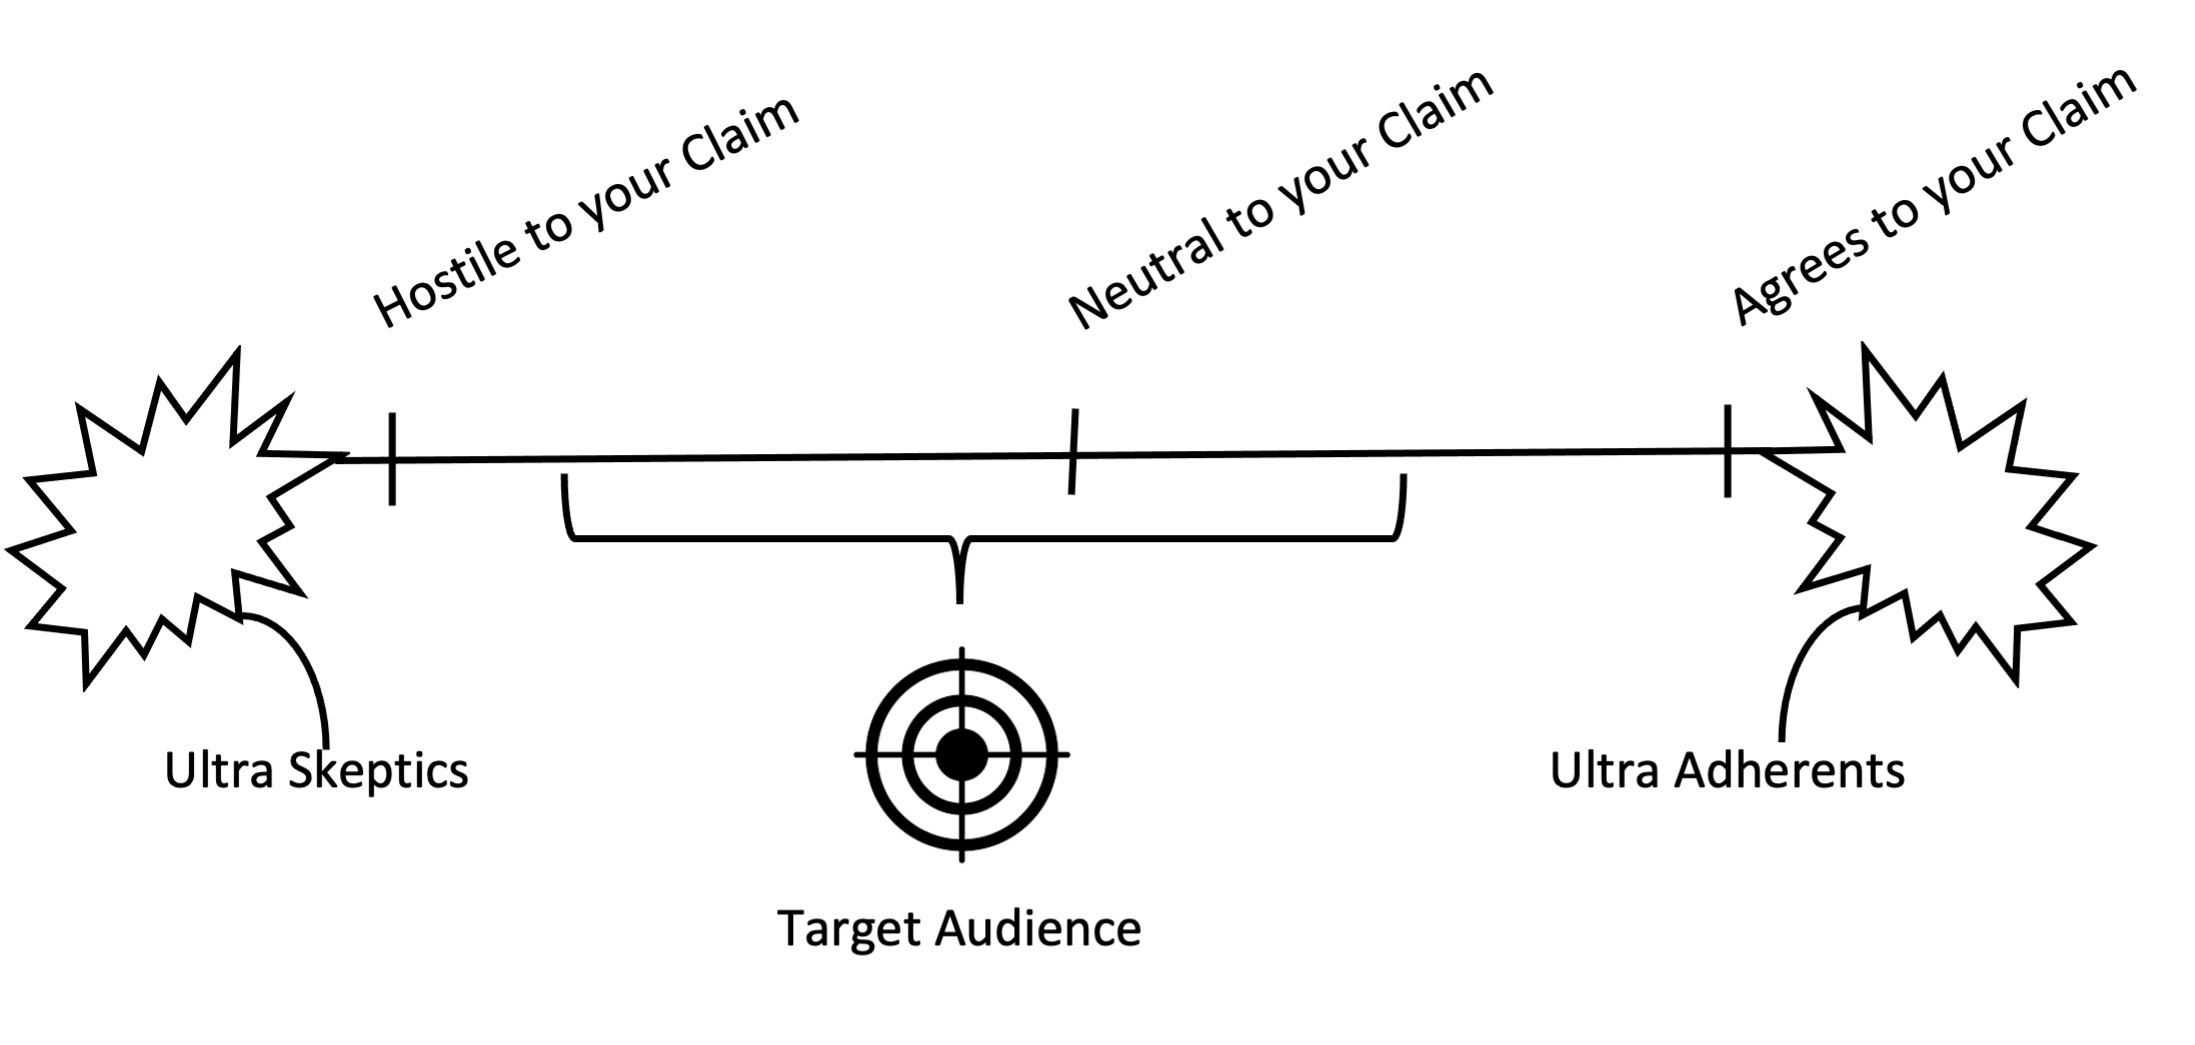 argument audience spectrum, from hostile (ultra skeptics) to agrees (ultra adherent)